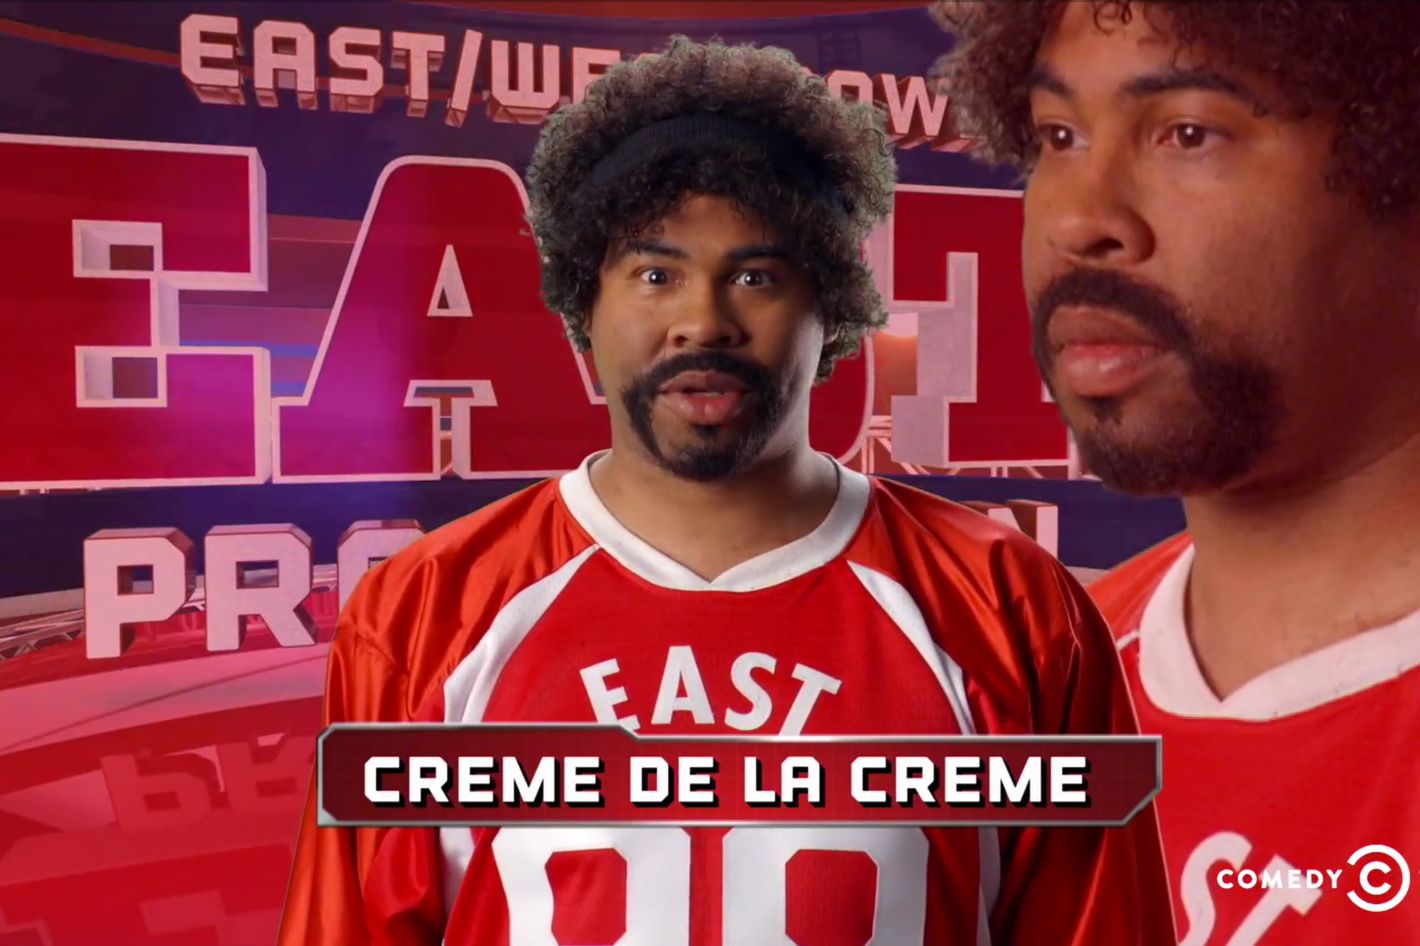 key and peele made up some more hilarious fake football-player names